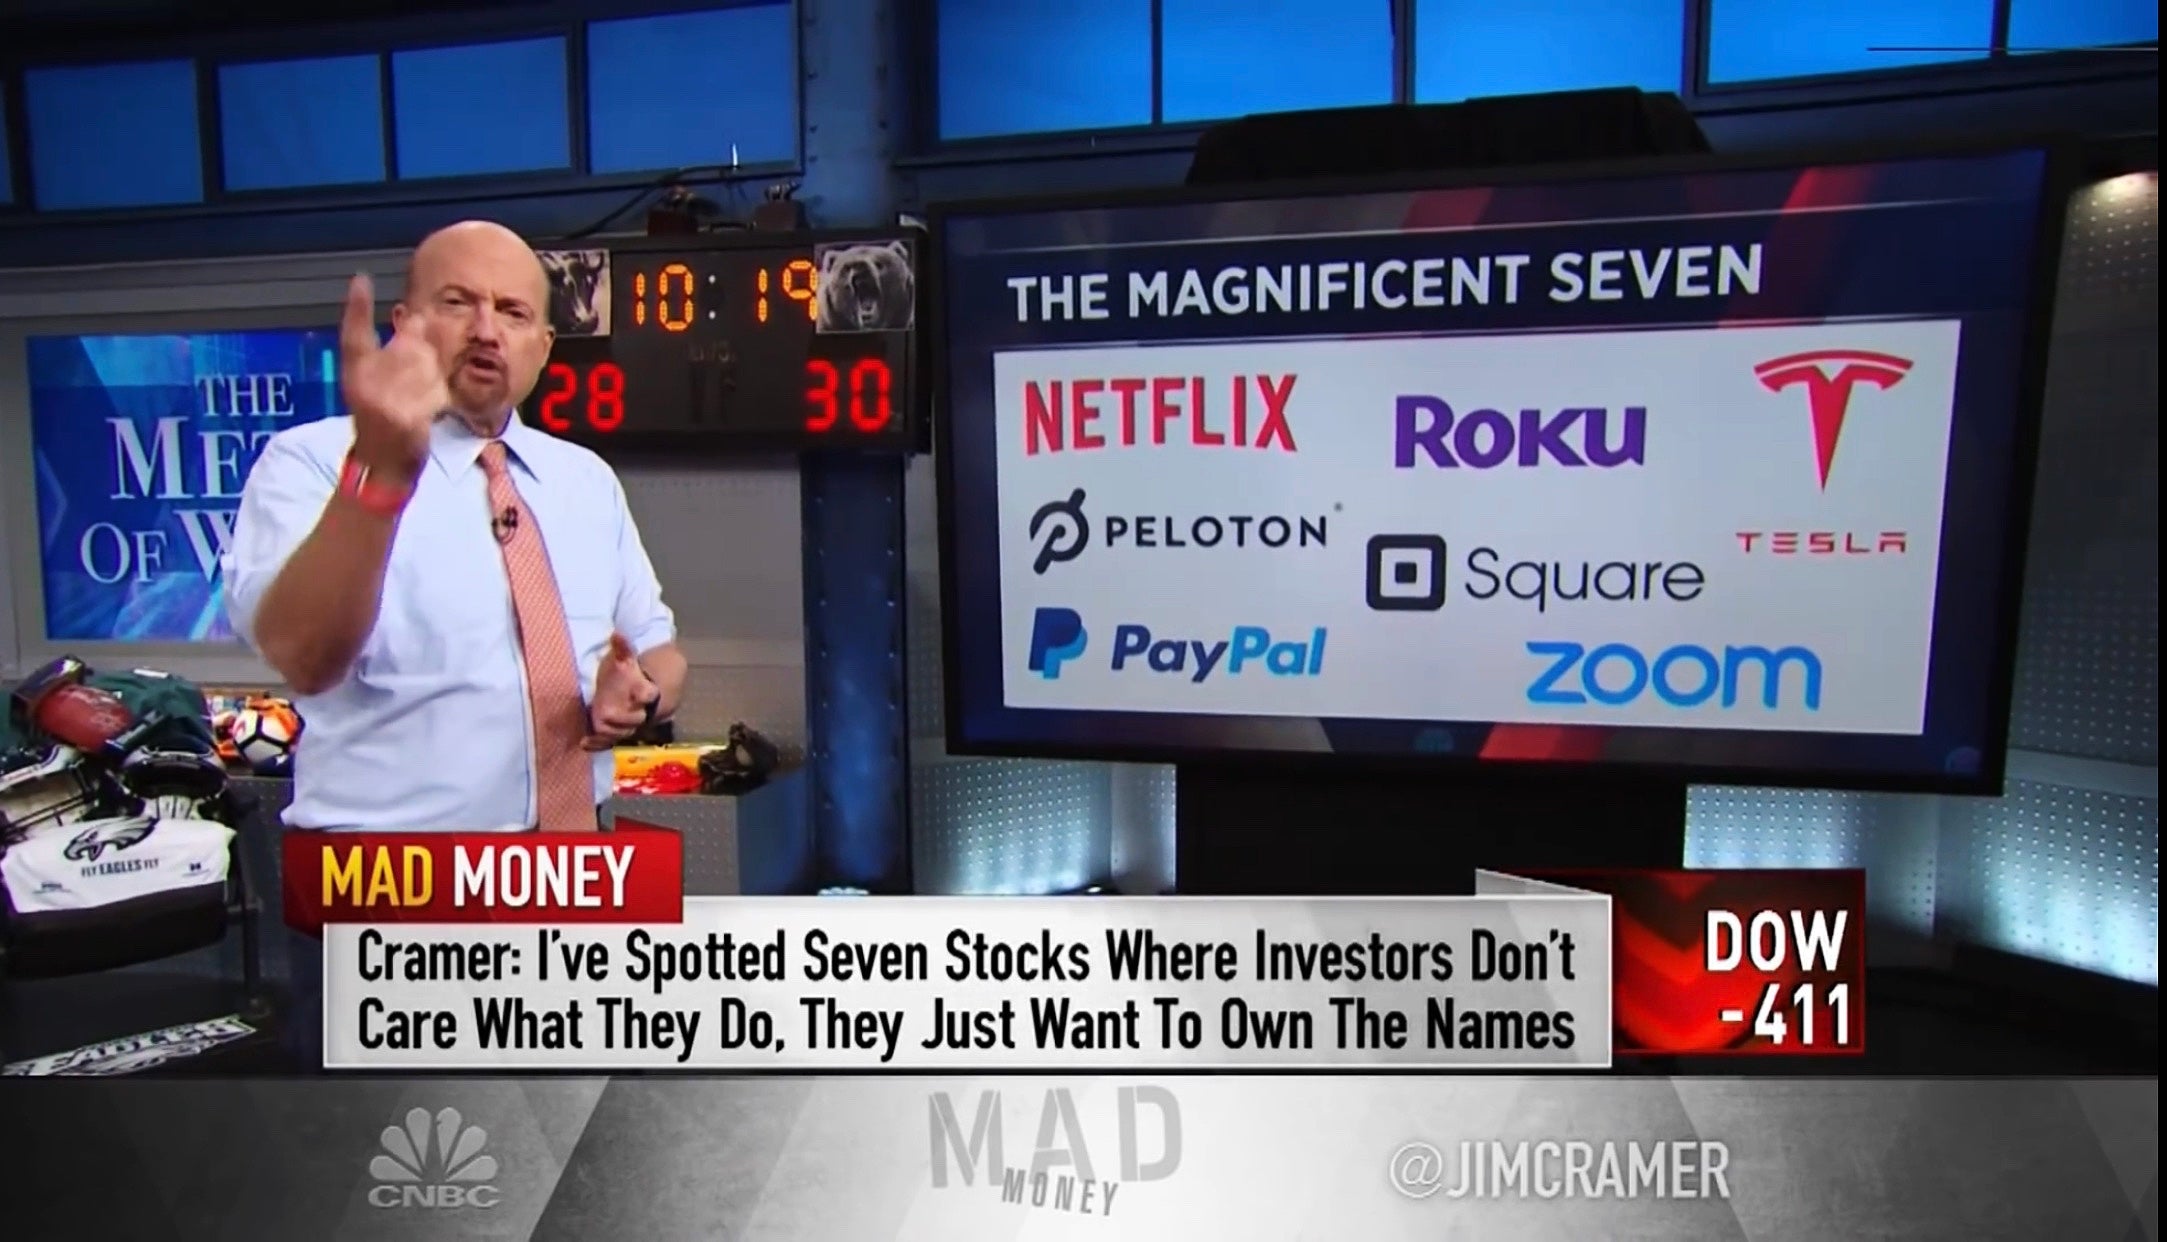 Tesla Inc TSLA Included In Jim Cramer’s New ‘Magnificent 7’ After His Famous ‘FANG’